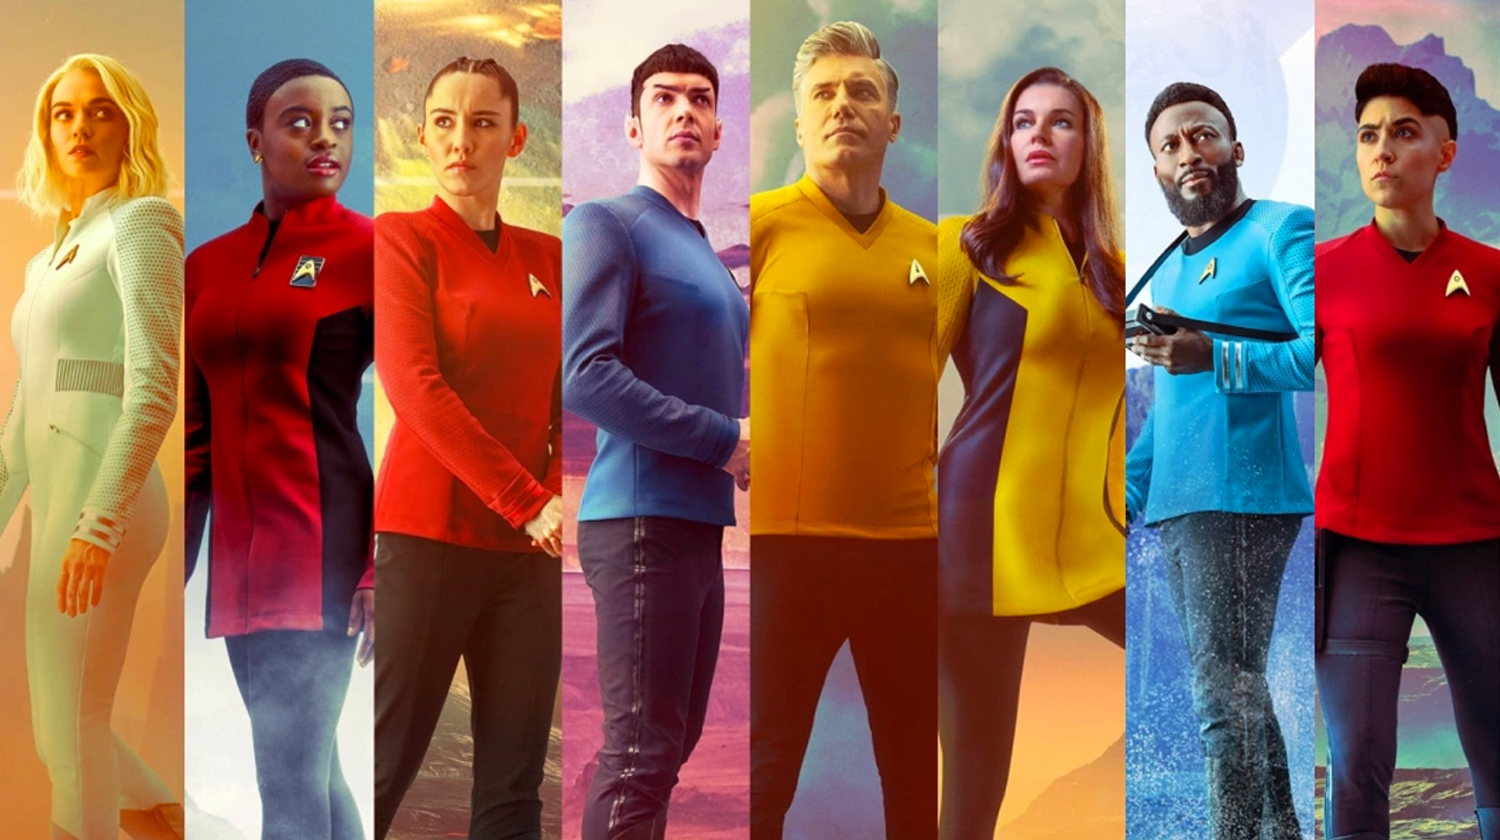 An array of Star Trek characters wearing different colored shirts